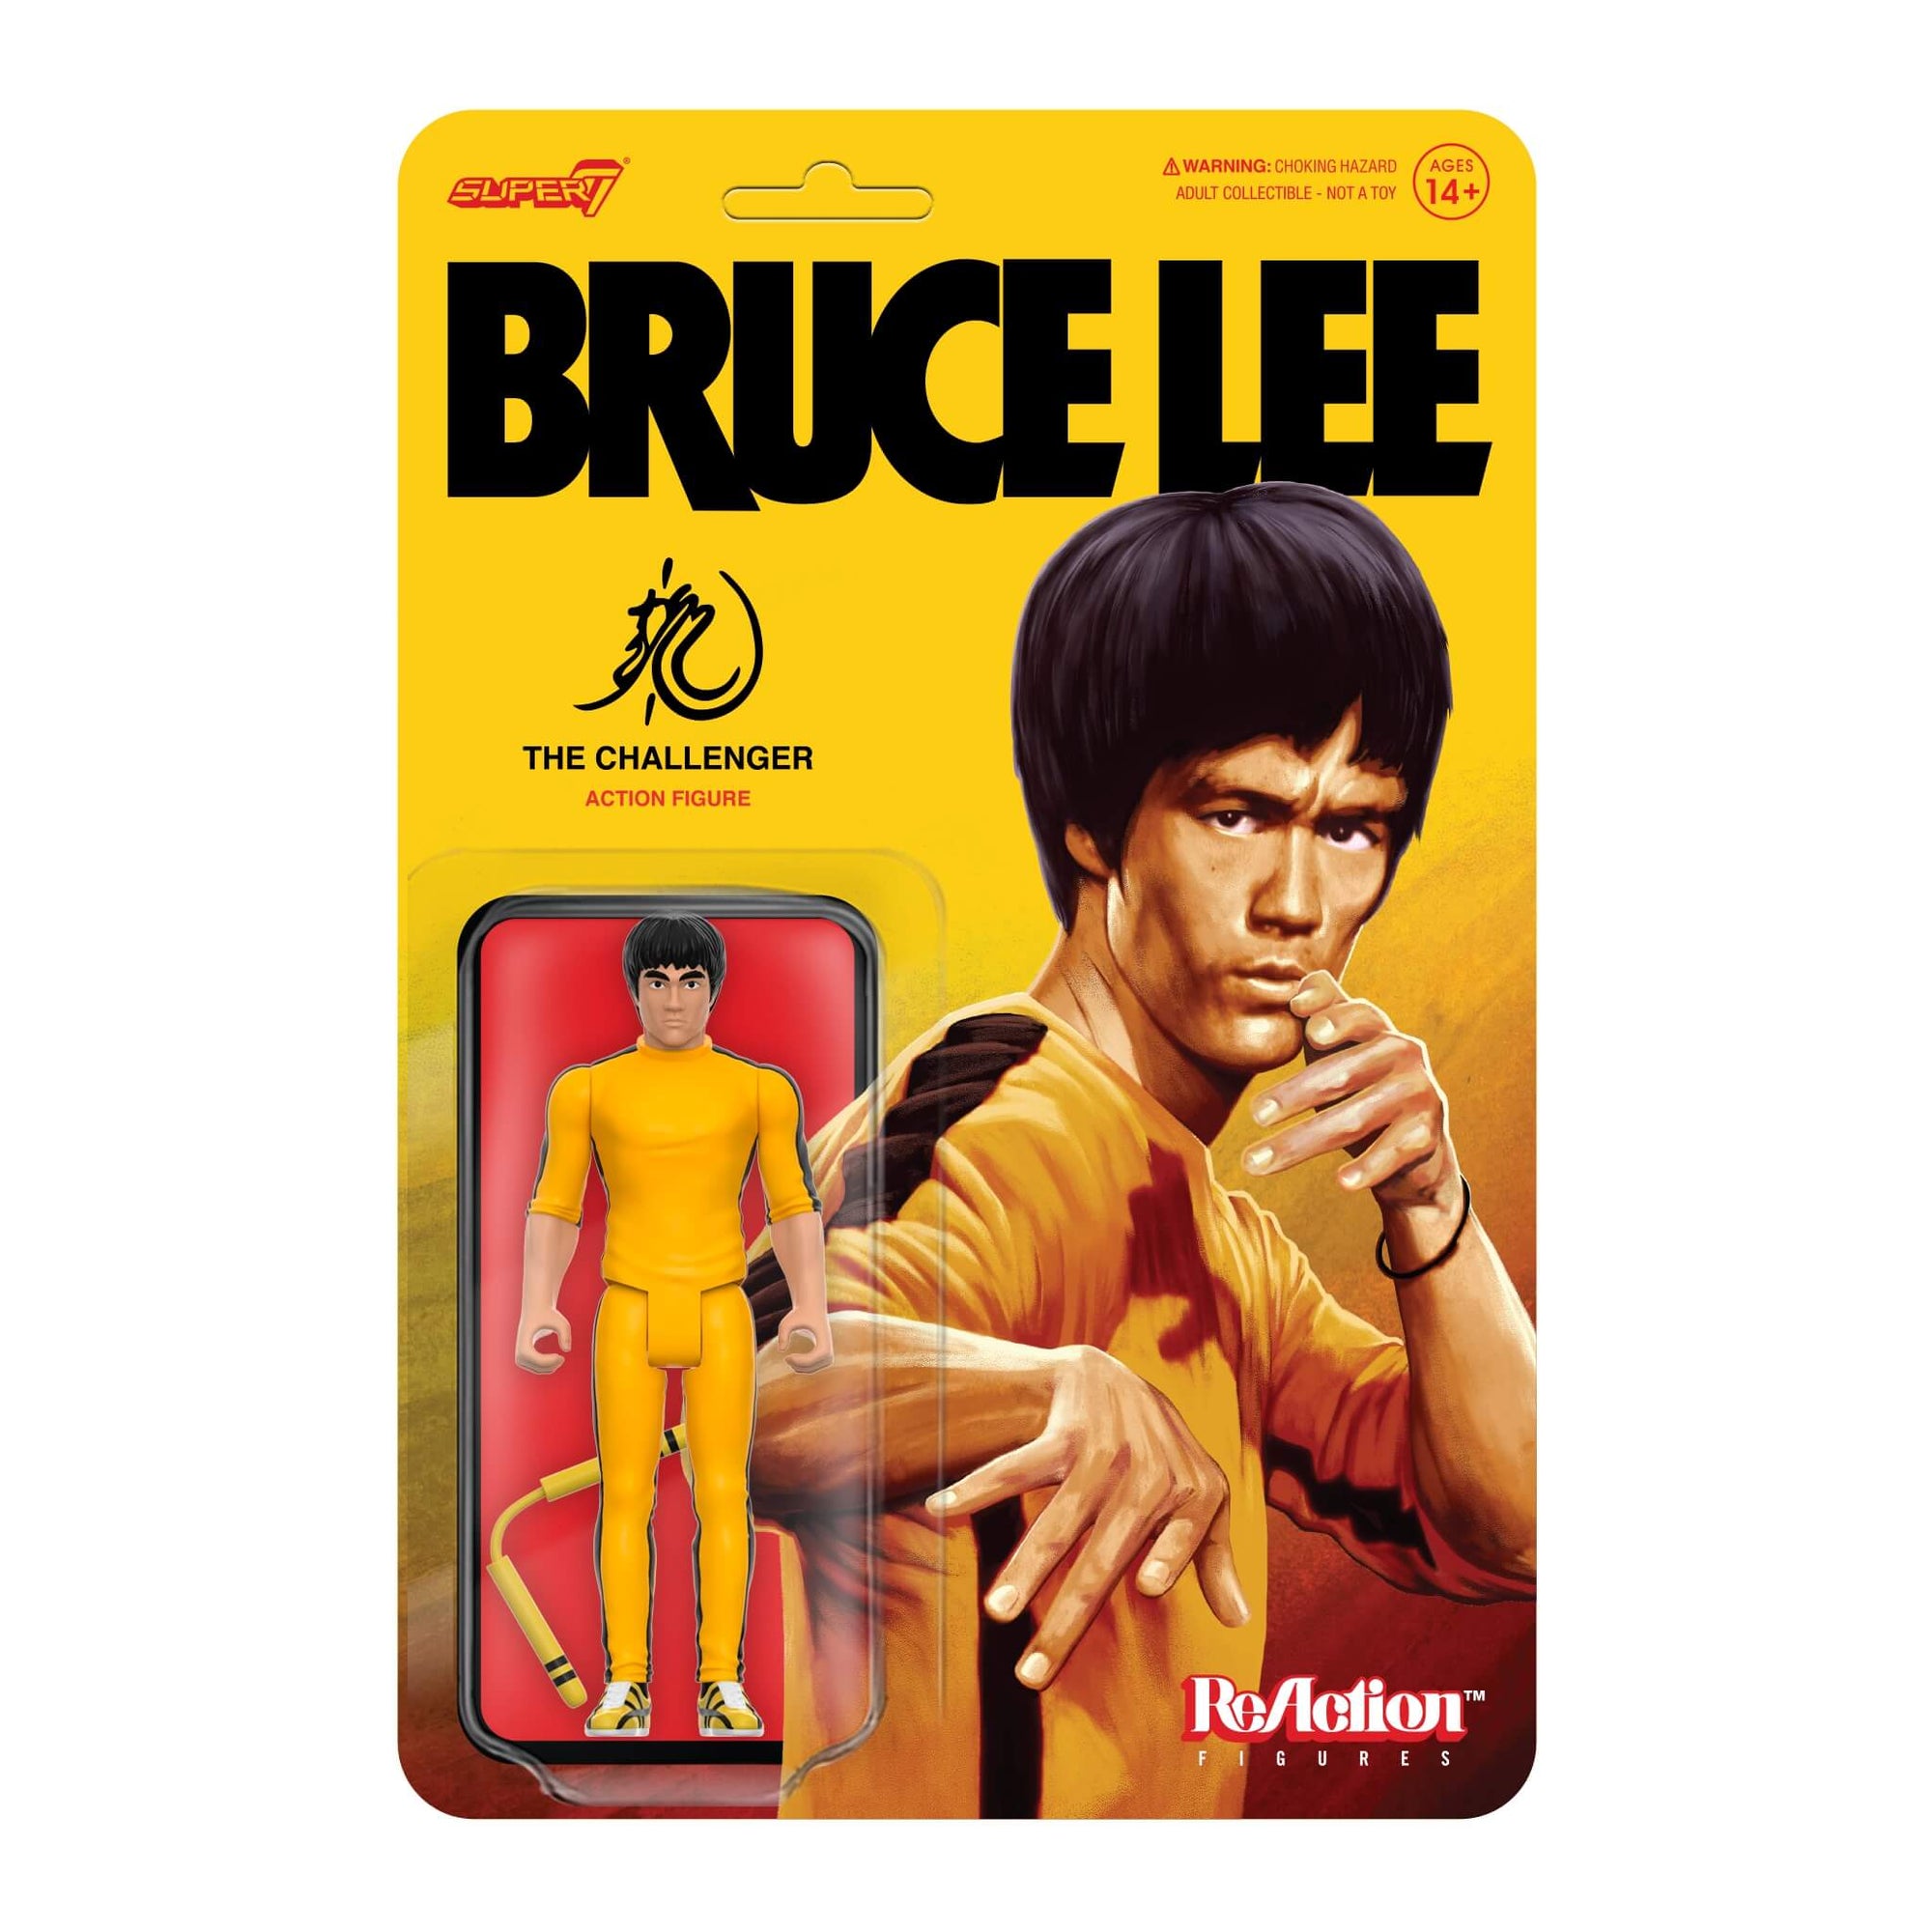 Bruce Lee (The Challenger) - Bruce Lee by Super7